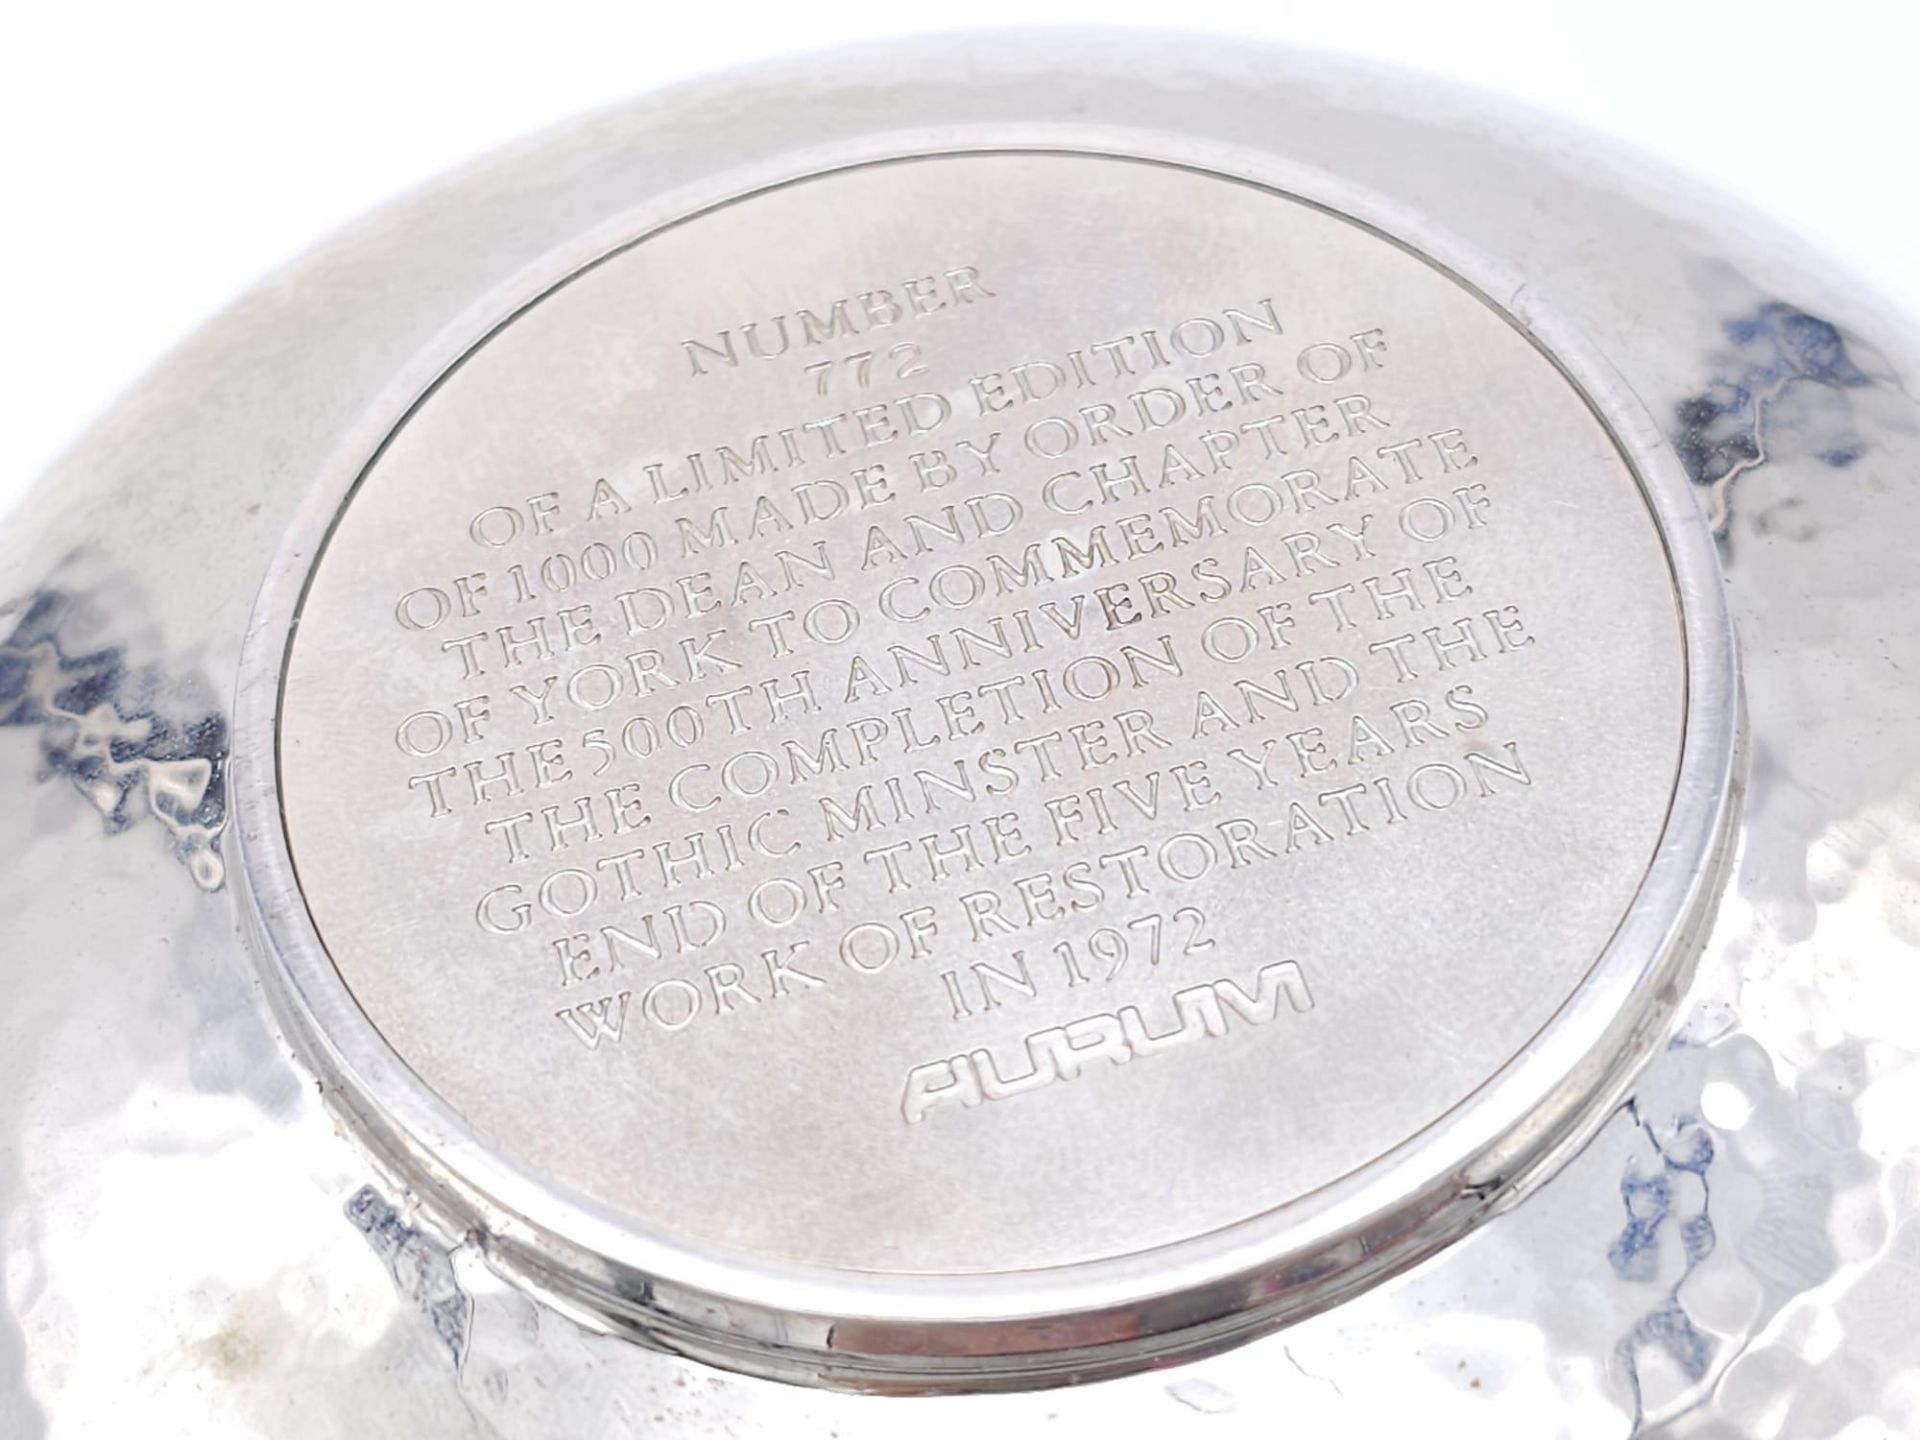 A 1972 HEAVY SILVER LIMITED EDITION DISH 772/1000 COMMEMORATING THE 500th ANNIVERSARY OF YORK - Image 10 of 10